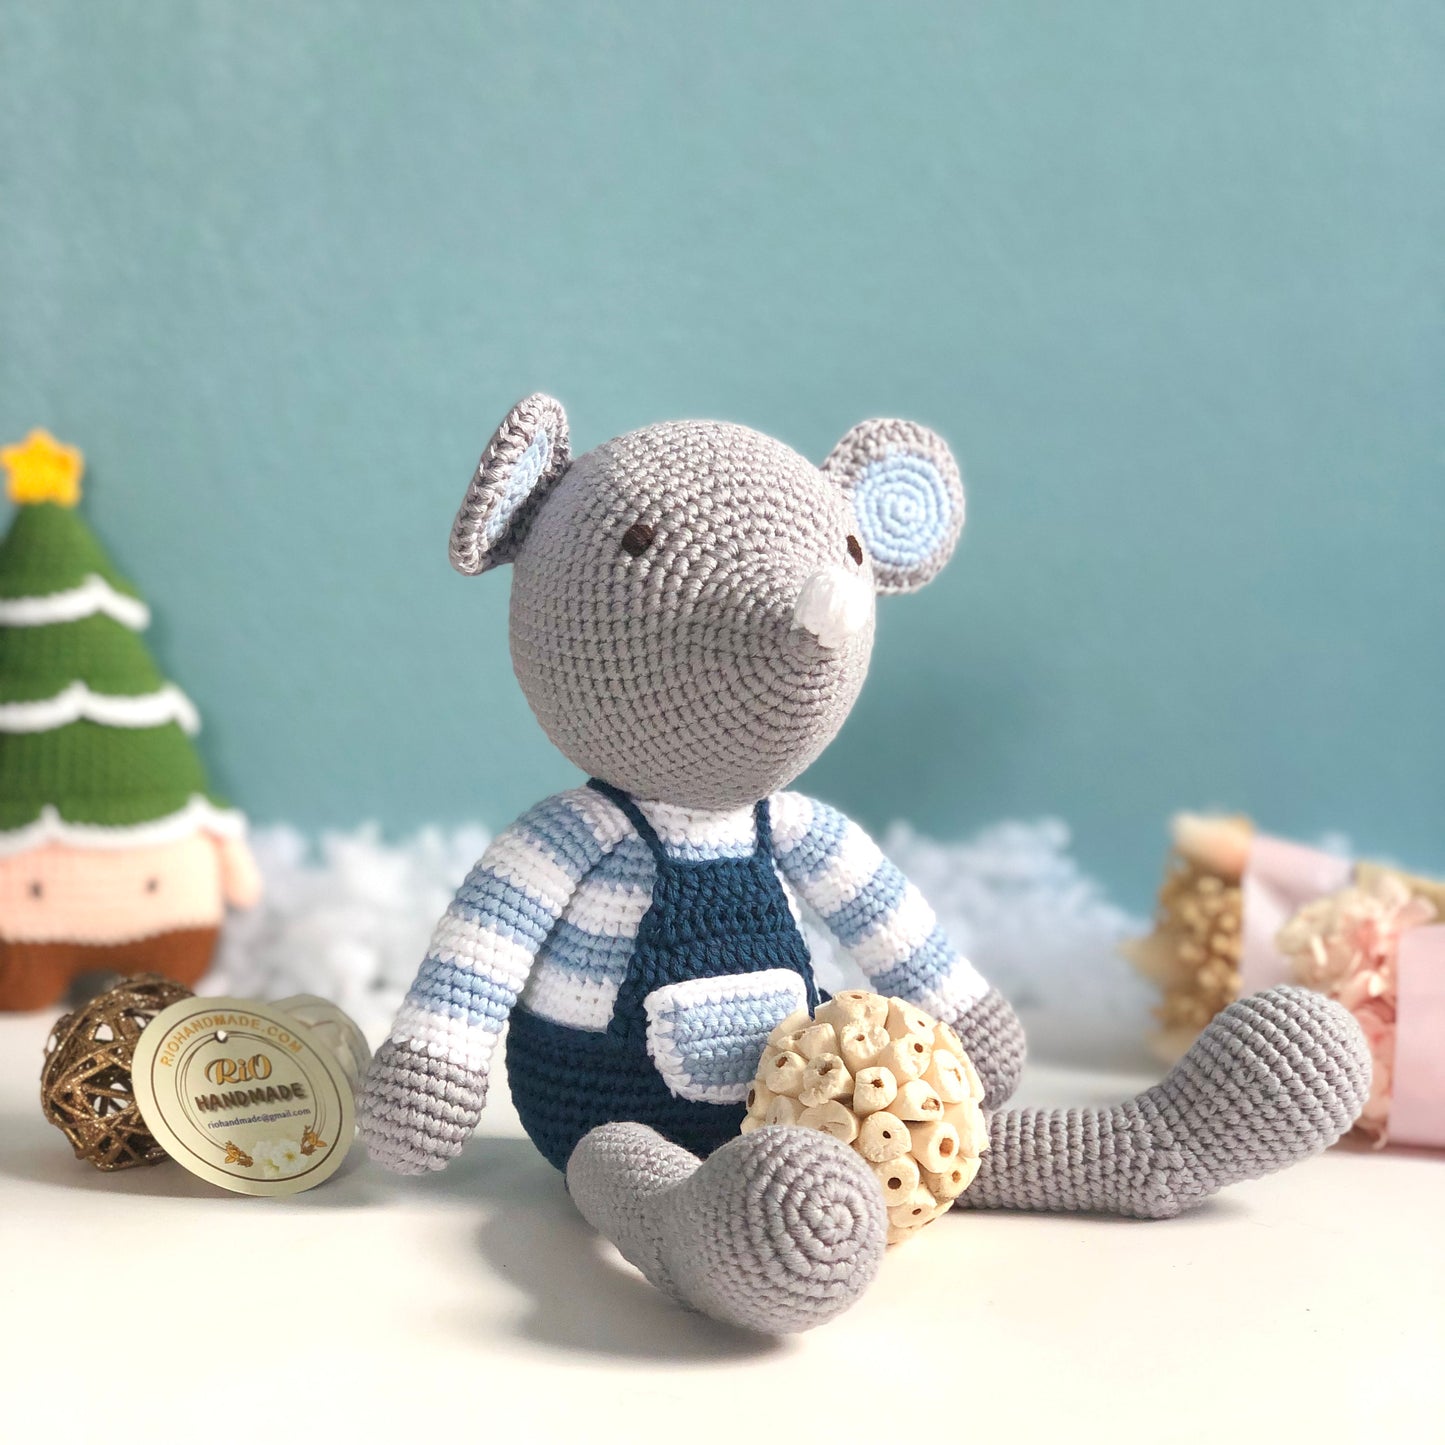 Handmade Yarn Cotton Remy boy mouse Doll Crochet Amigurumi Toy, cute, soft toy for baby, toddler, kid, adult hobby